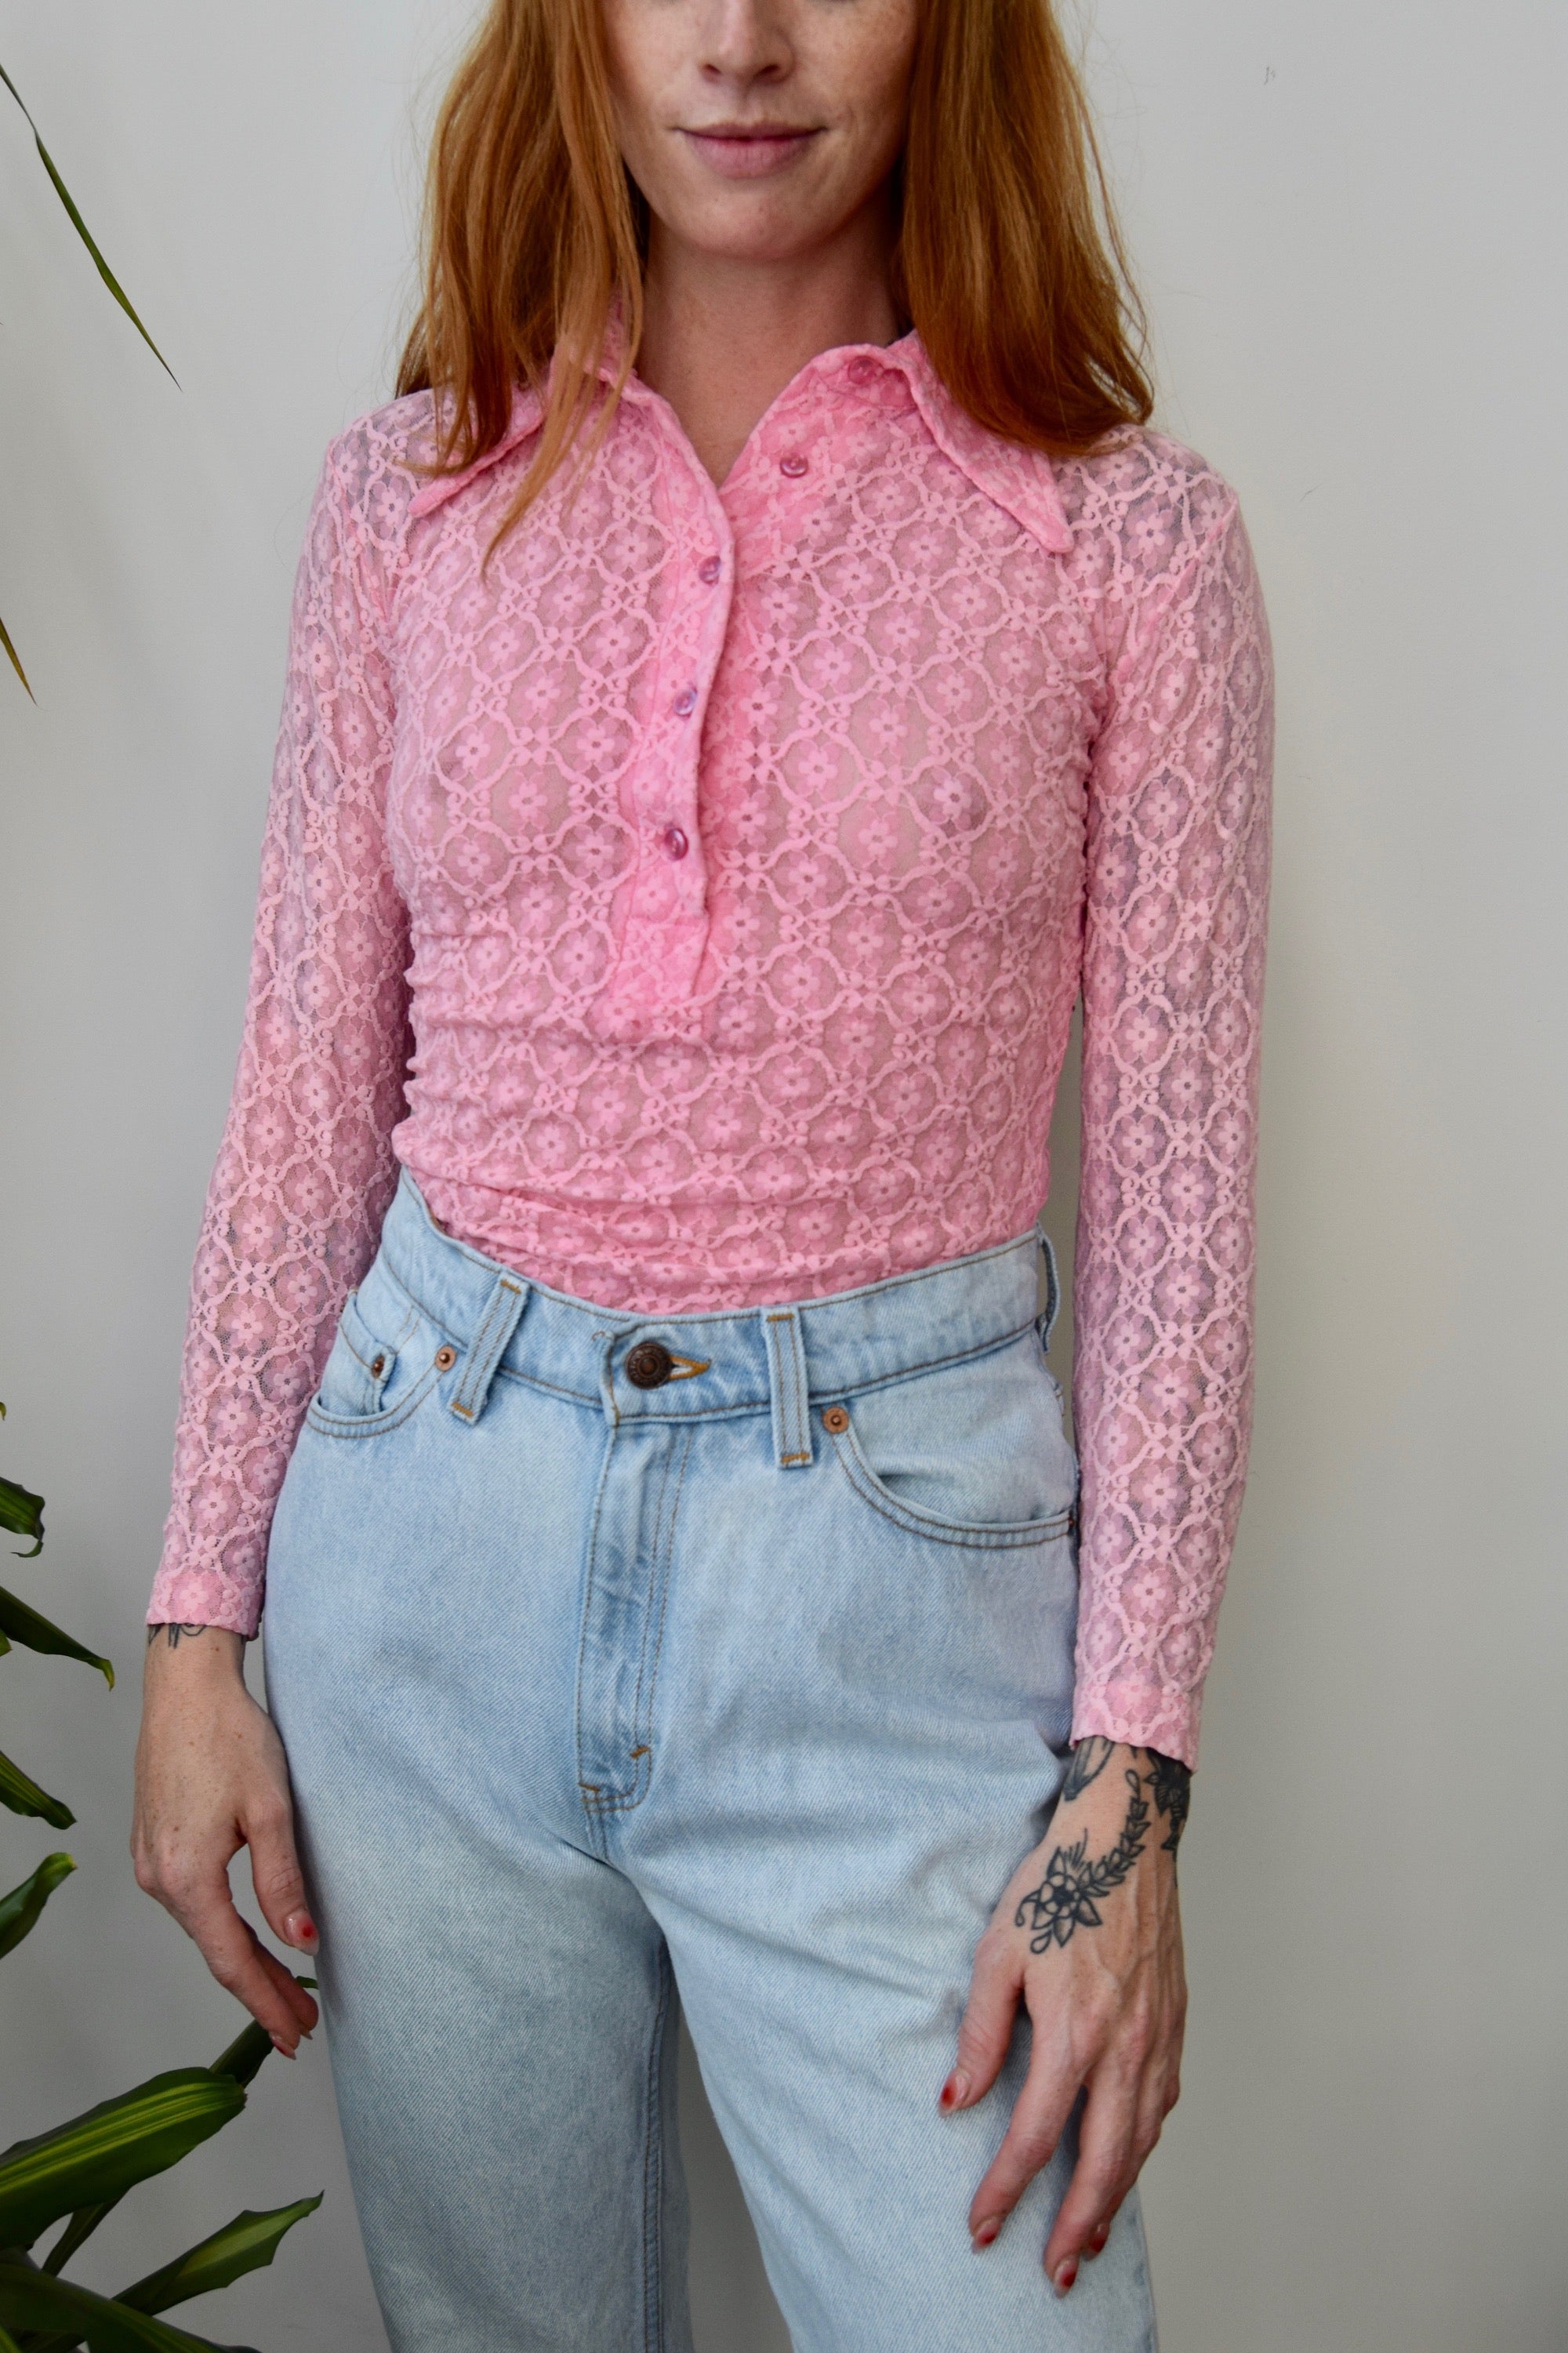 Cotton Candy Lace Top